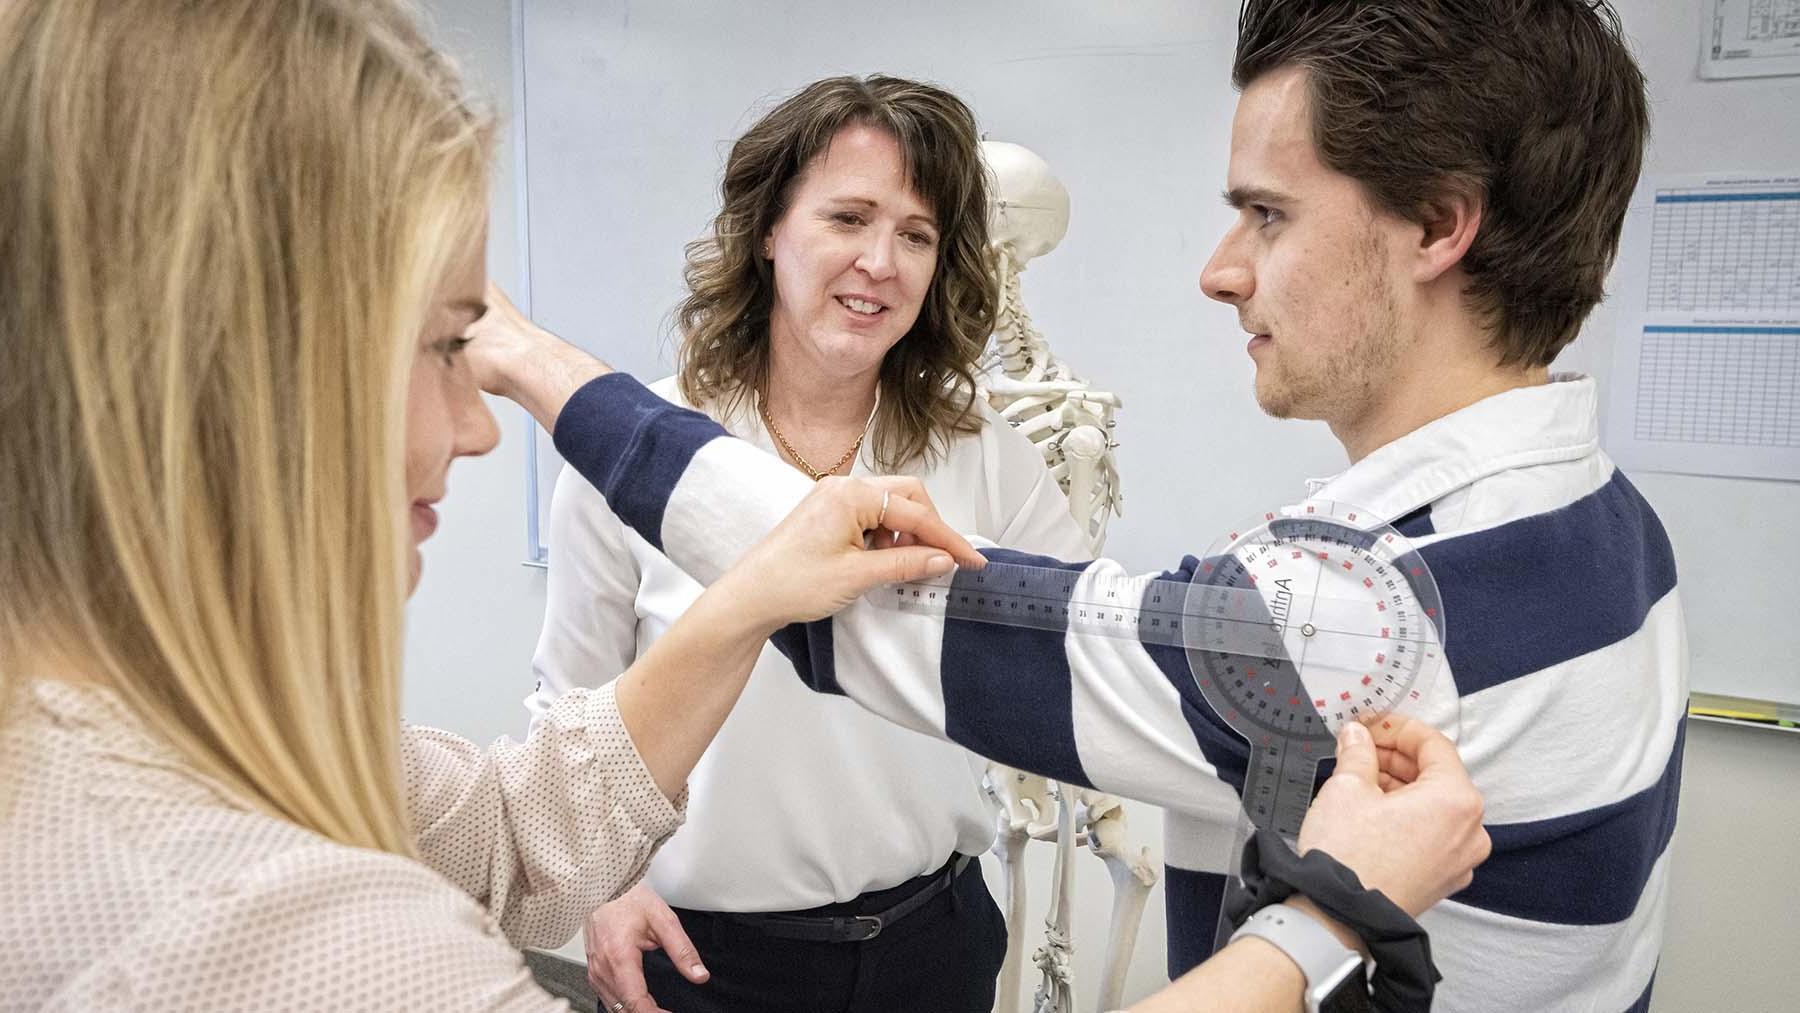 Occupational therapy student assessing shoulder movement of a classmate with the professor looking on